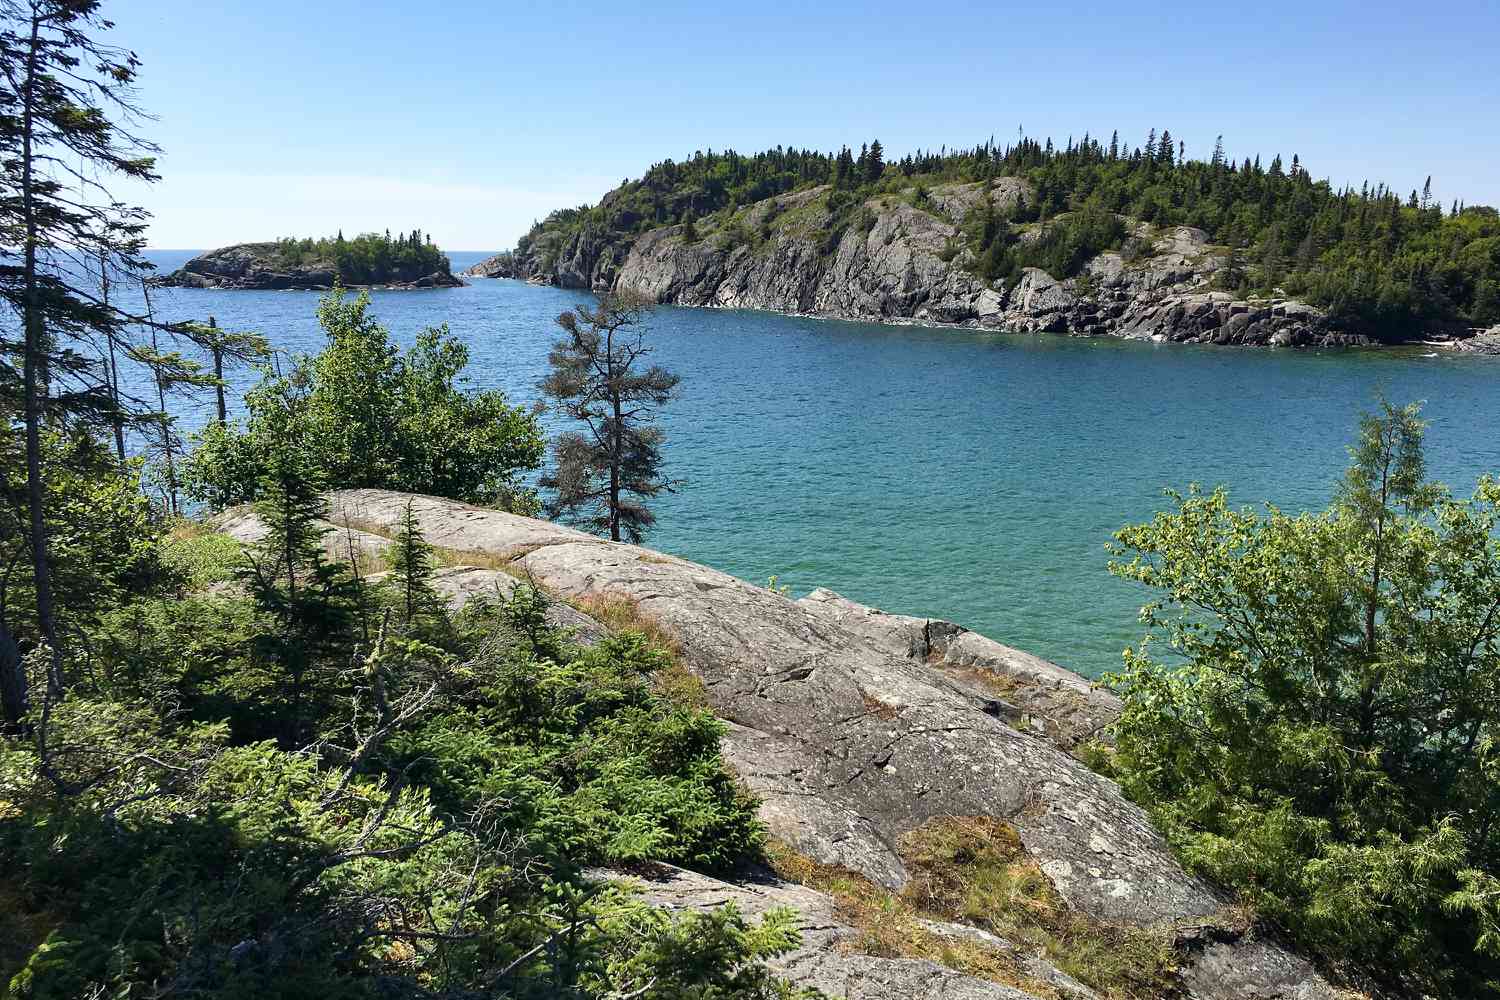 Canada Opens World’s Longest Hiking Trail That Stretches Coast to Coast